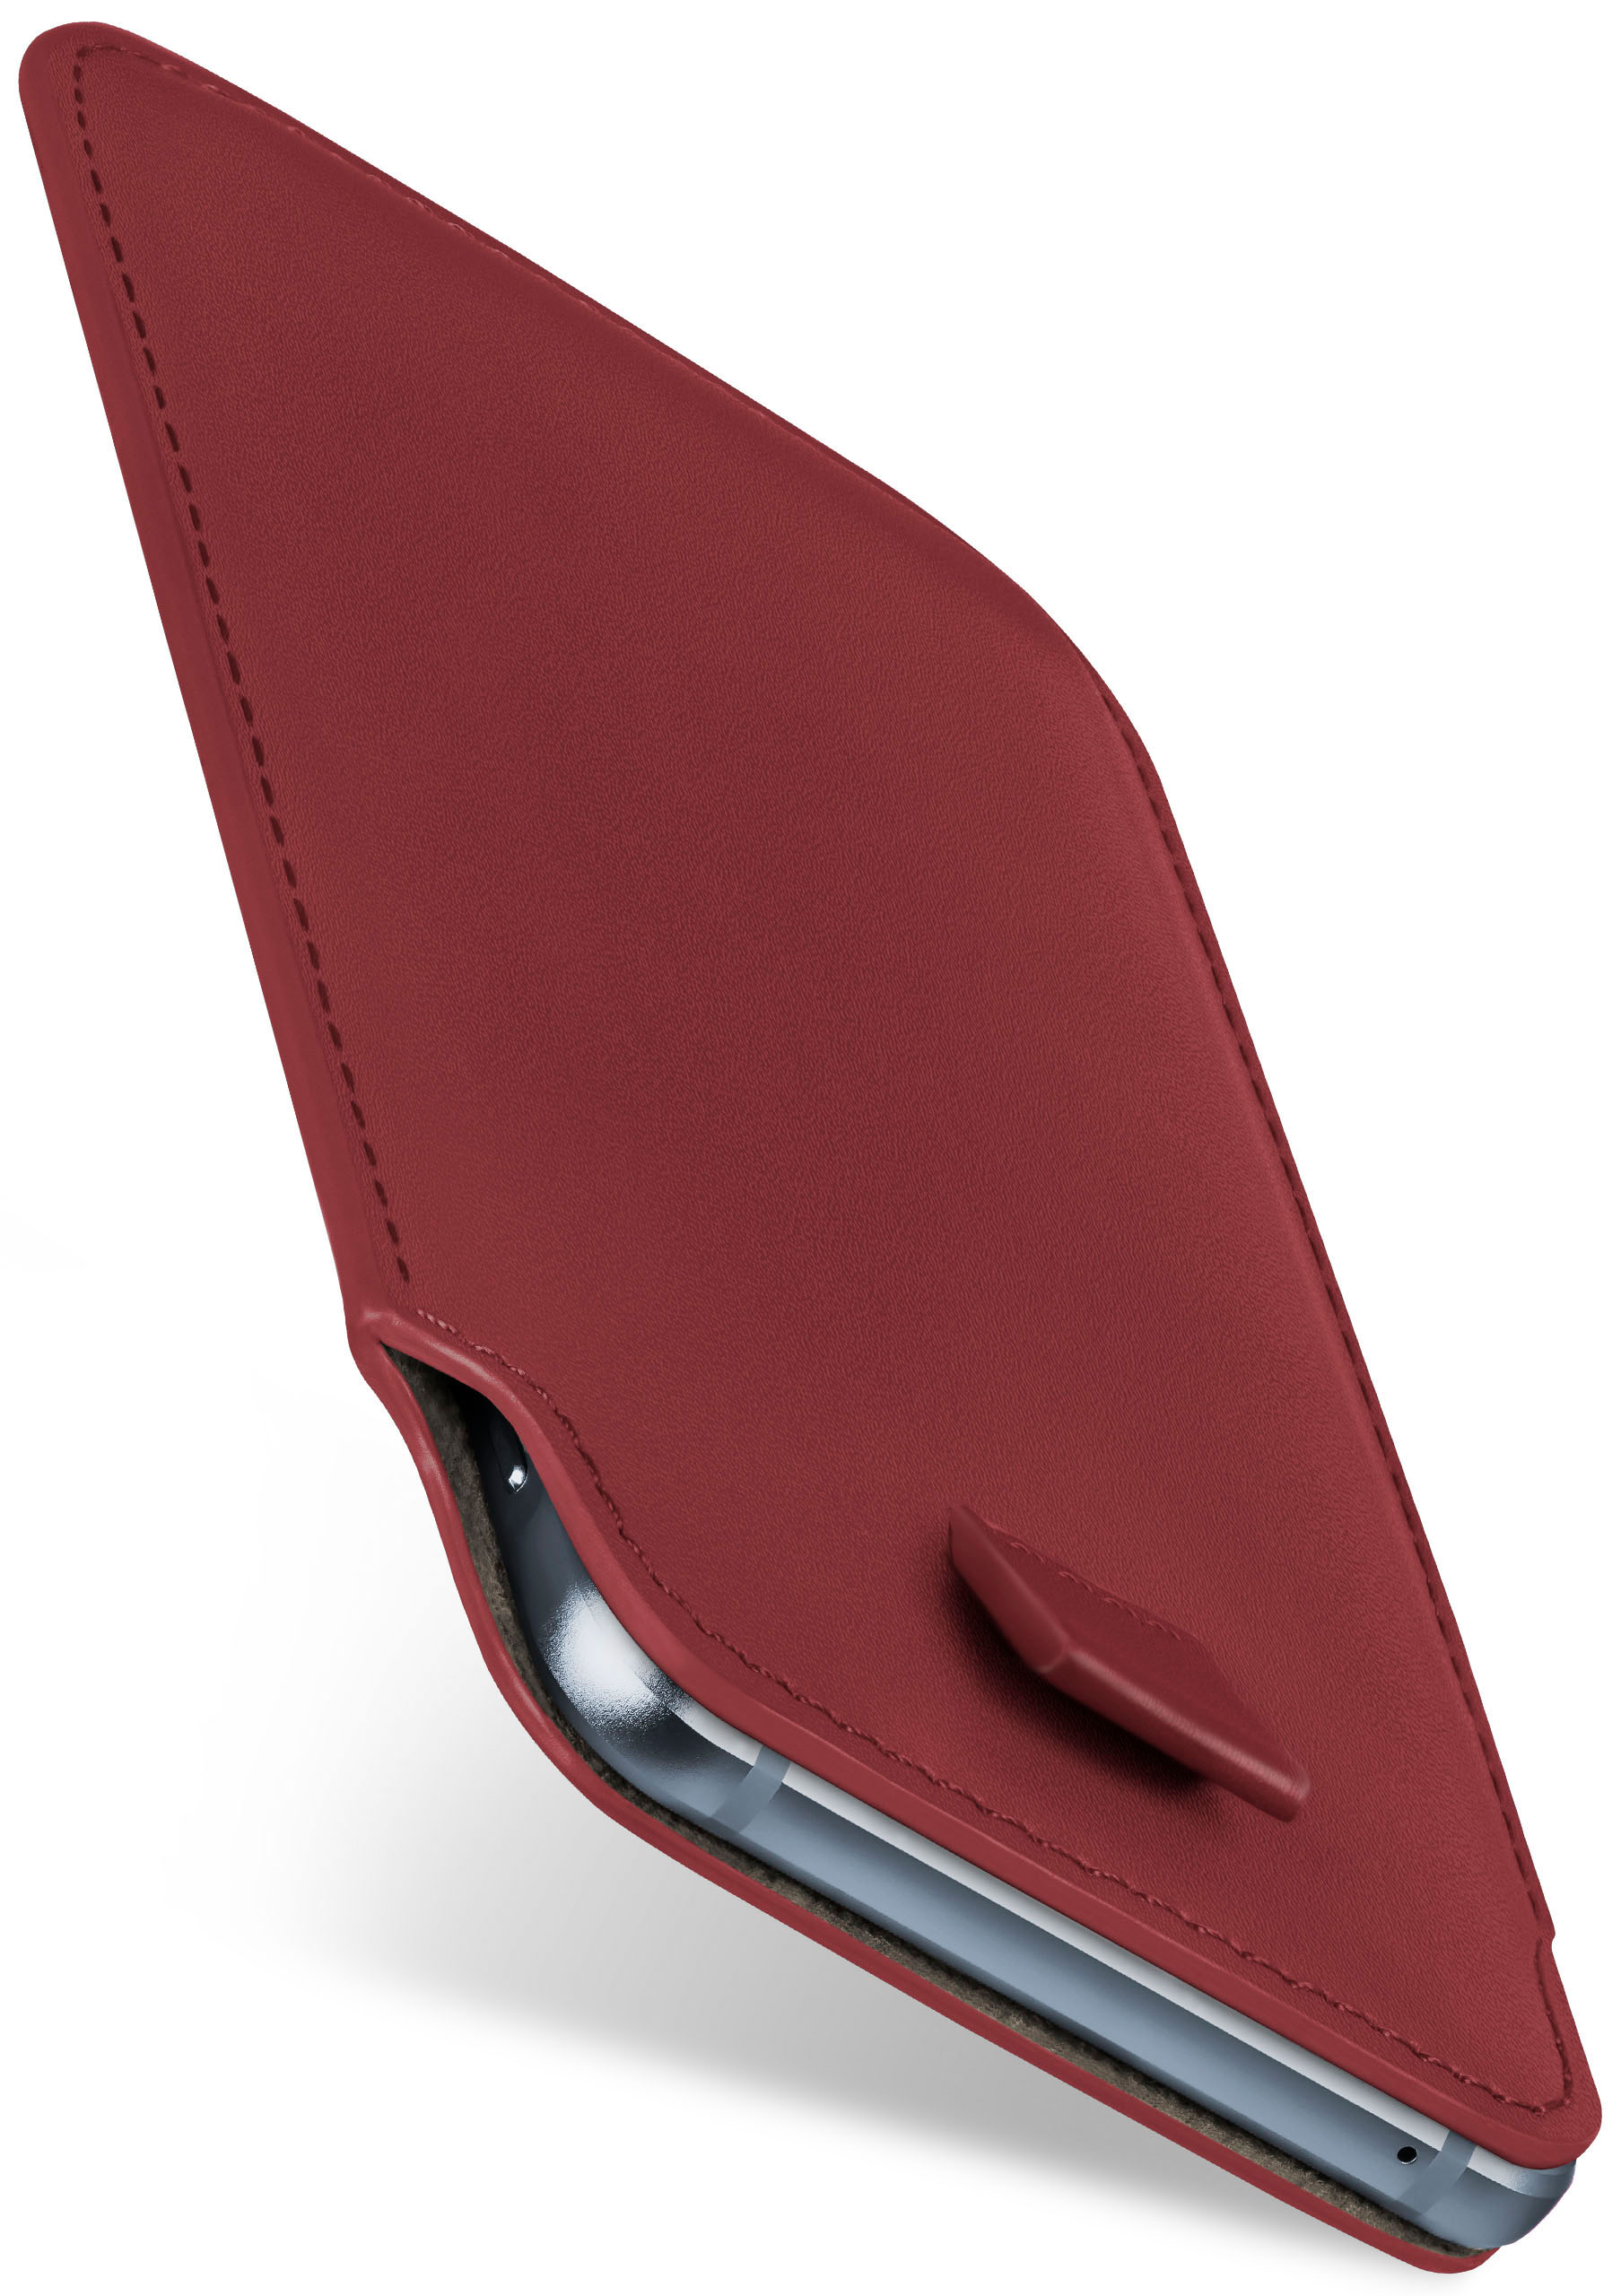 iPhone Full Apple, Cover, Pro, 12 12 / Case, Maroon-Red Slide MOEX